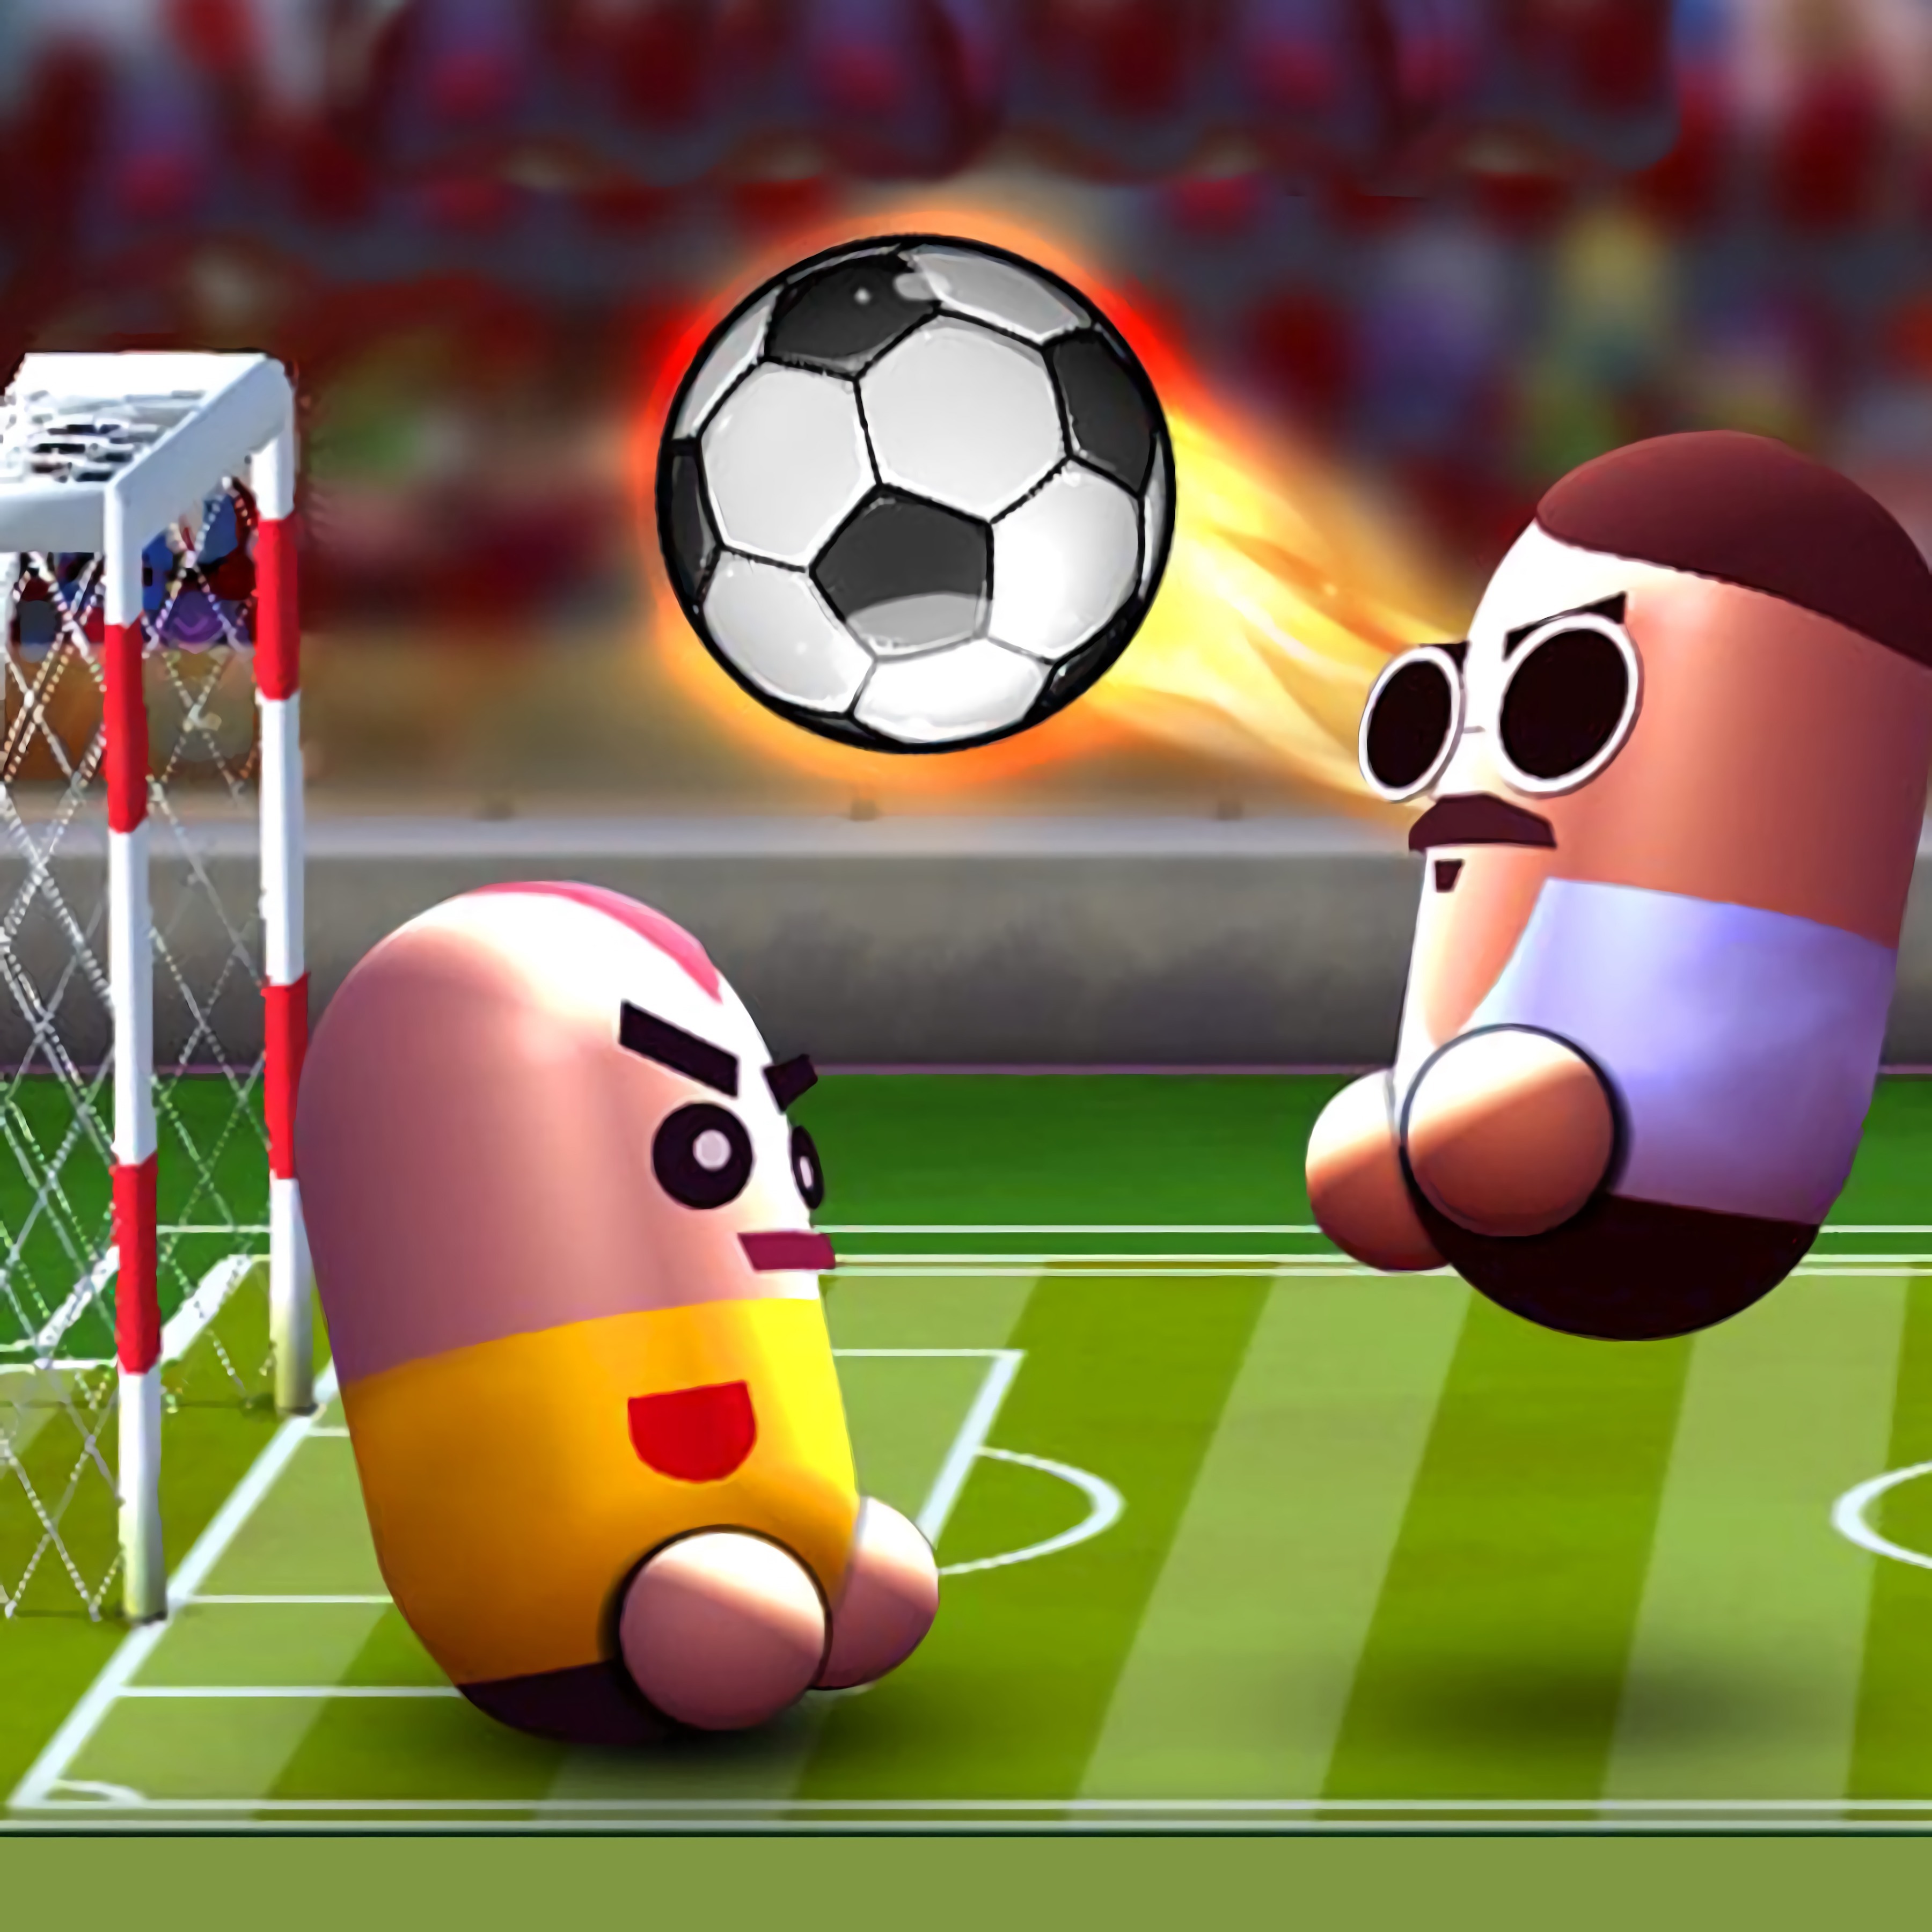 Football Games - Play Free Online Football Games on Friv 2